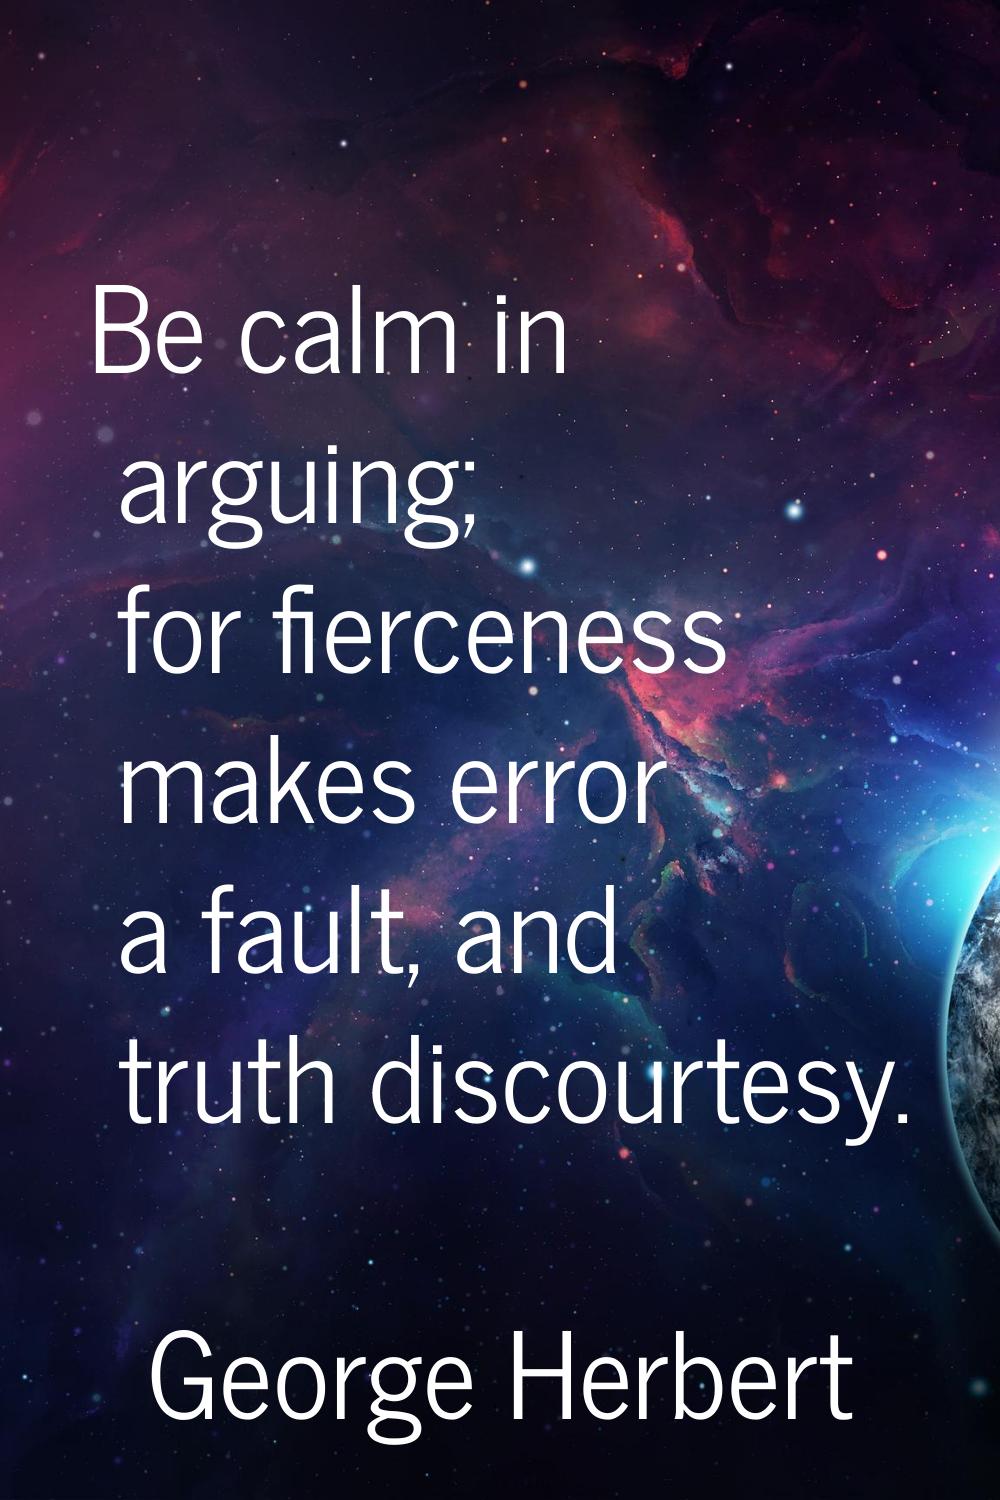 Be calm in arguing; for fierceness makes error a fault, and truth discourtesy.